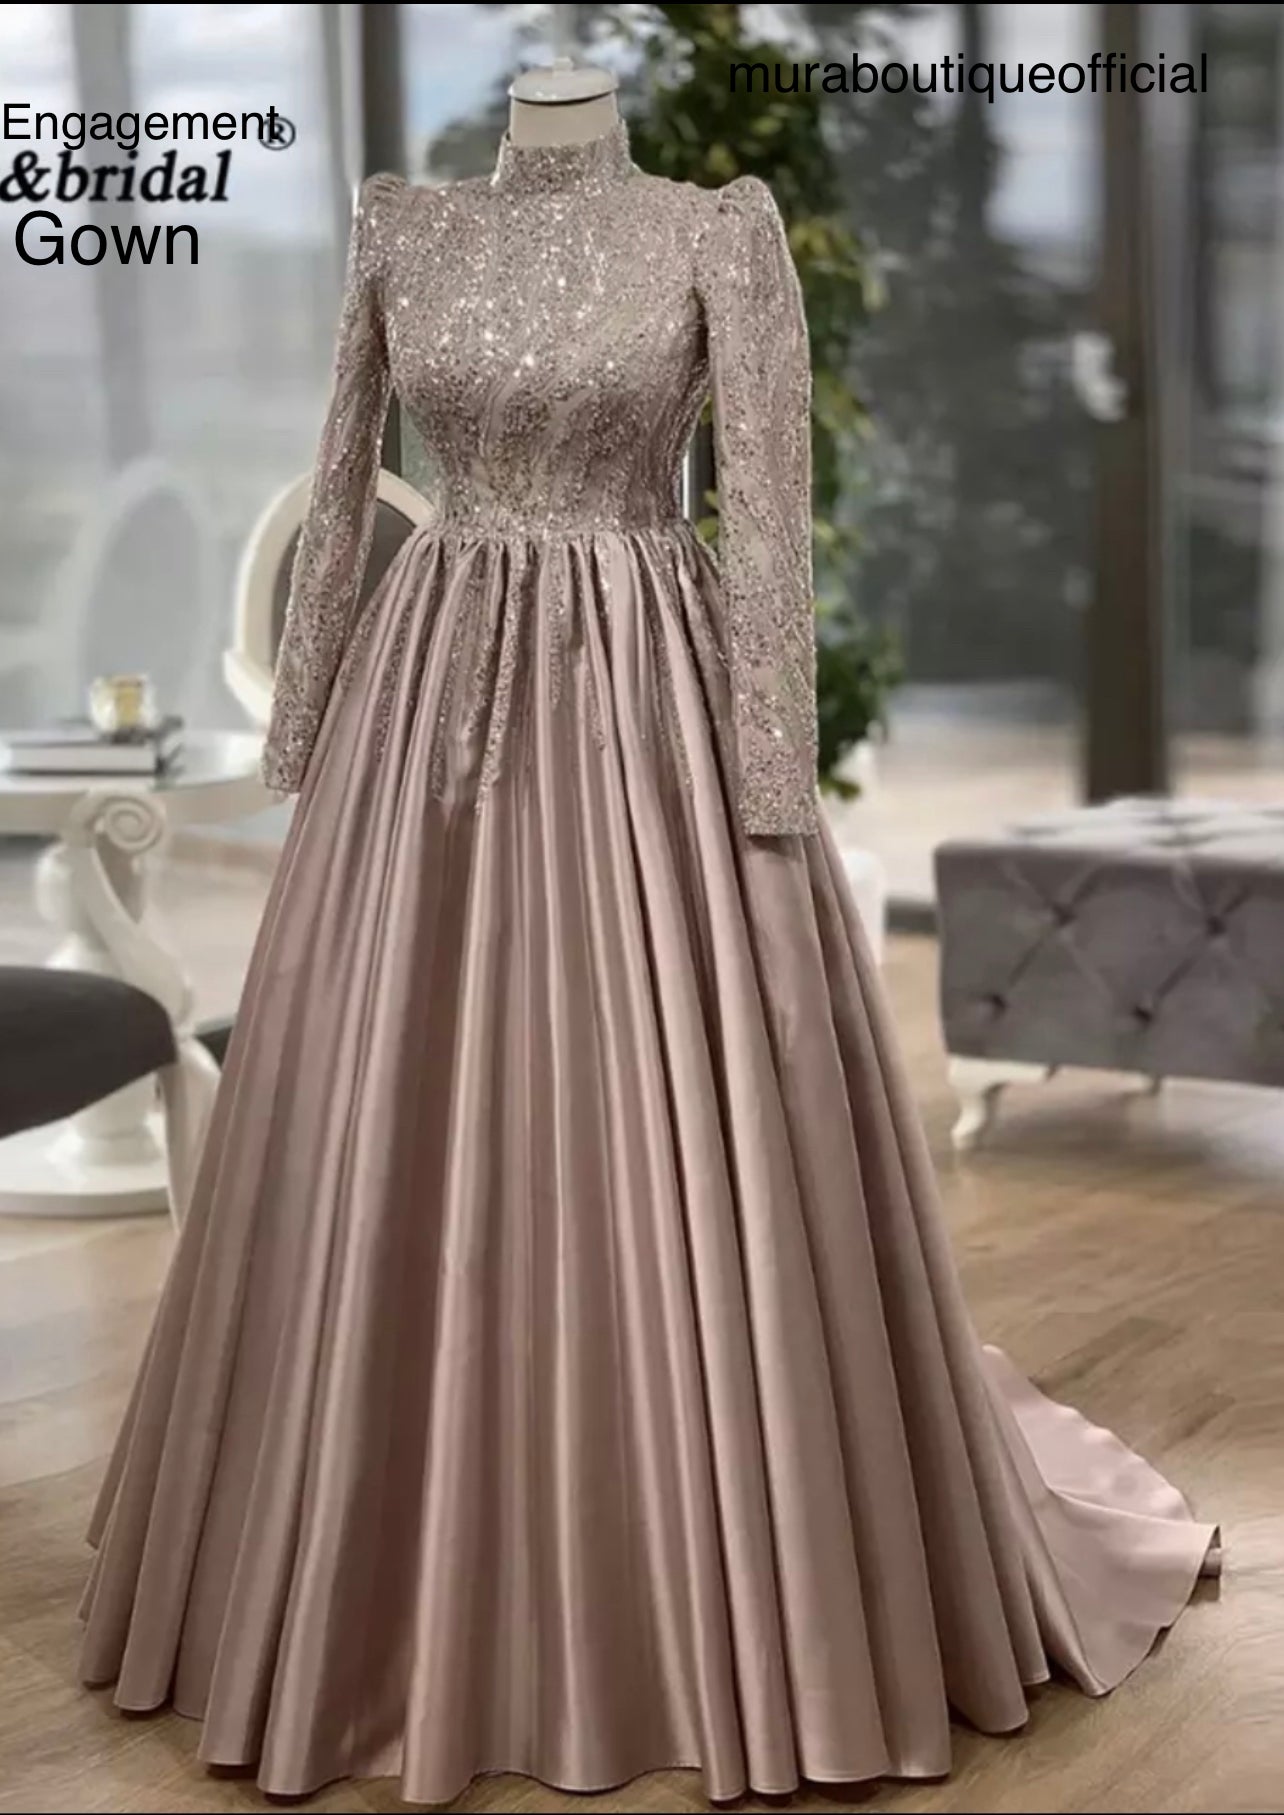 Undiscovered And Top Brands For Engagement Outfits | Party wear dresses, Engagement  gowns, Designer party wear dresses